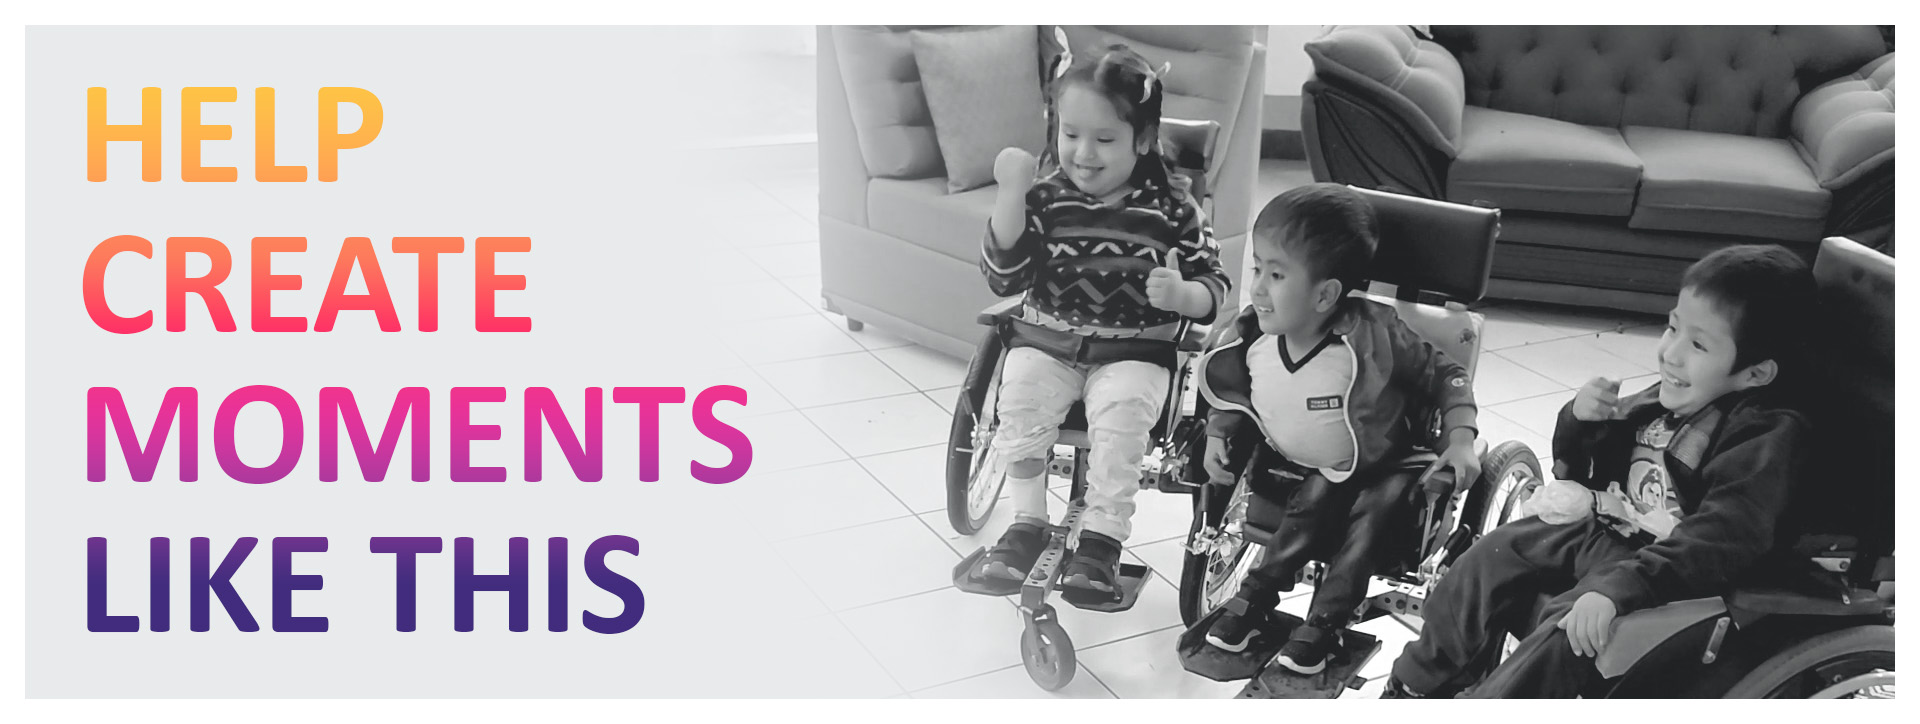 Help Create Moments Like This. An image of three smiling children, using wheelchairs.